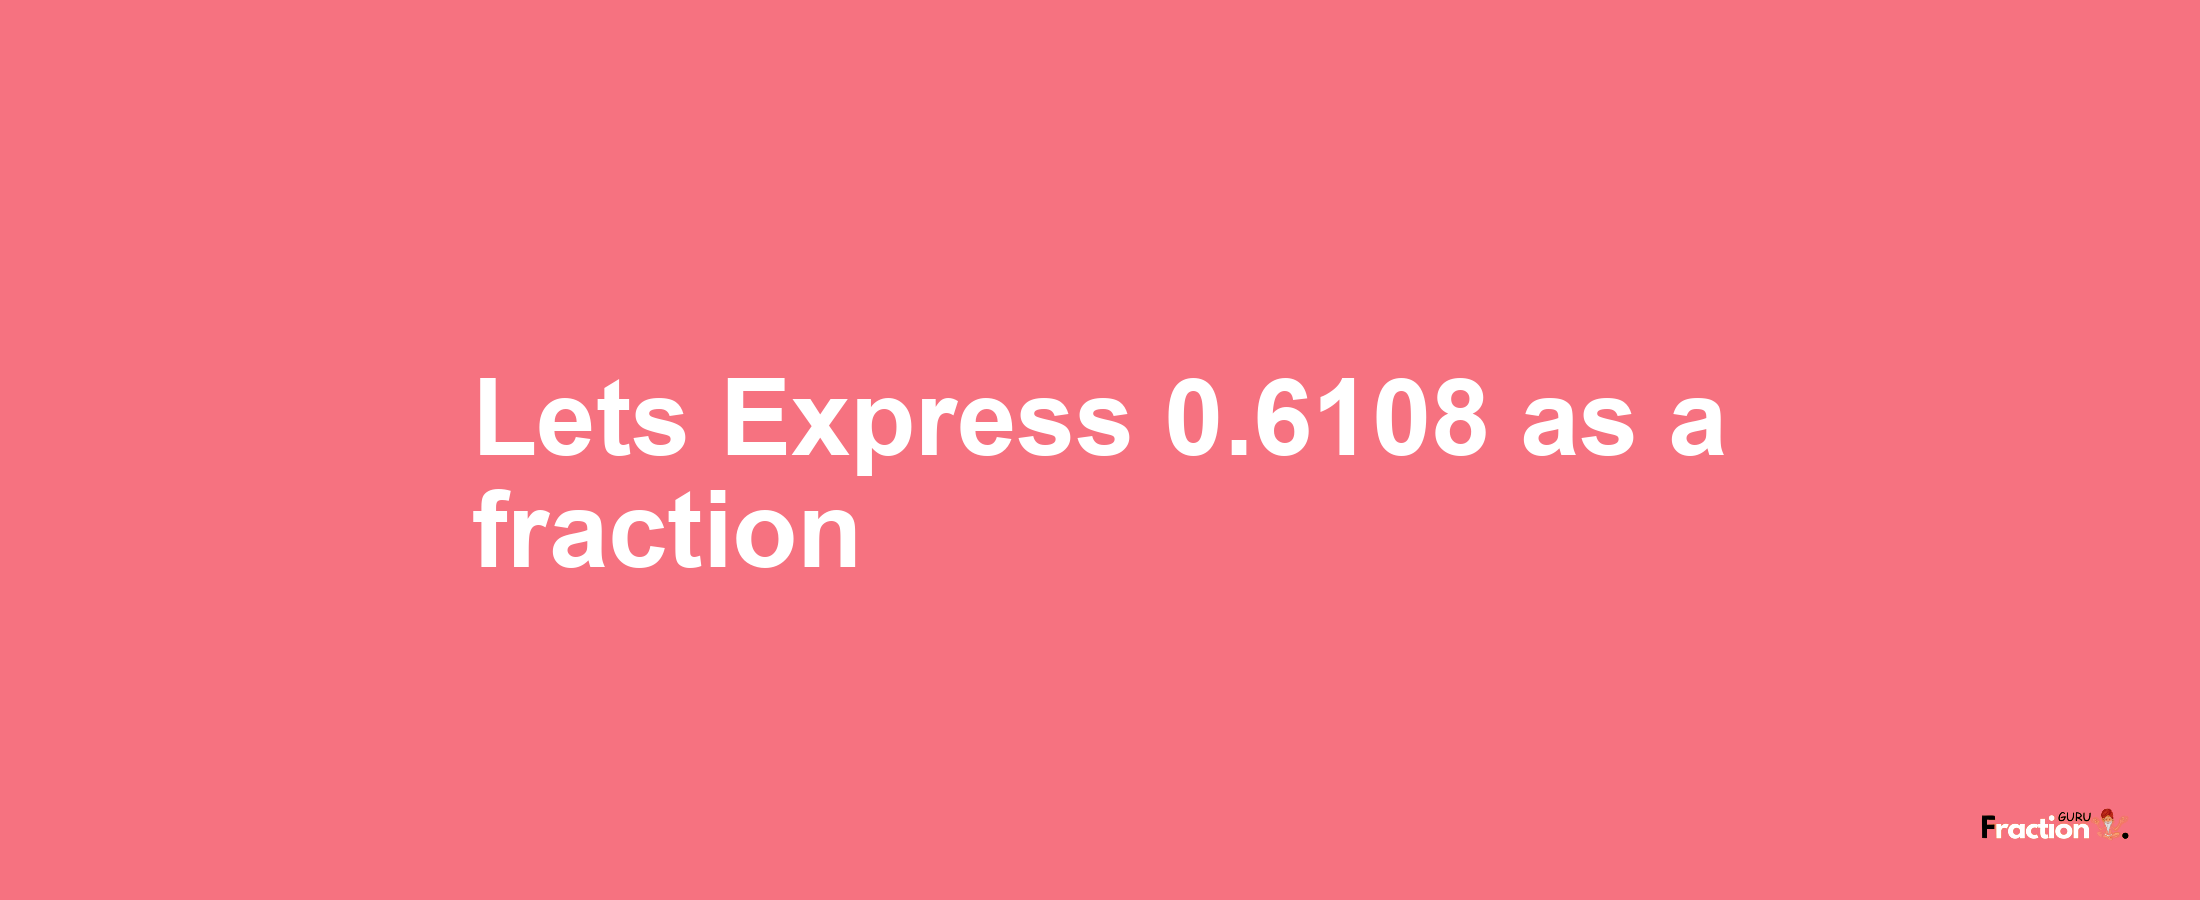 Lets Express 0.6108 as afraction